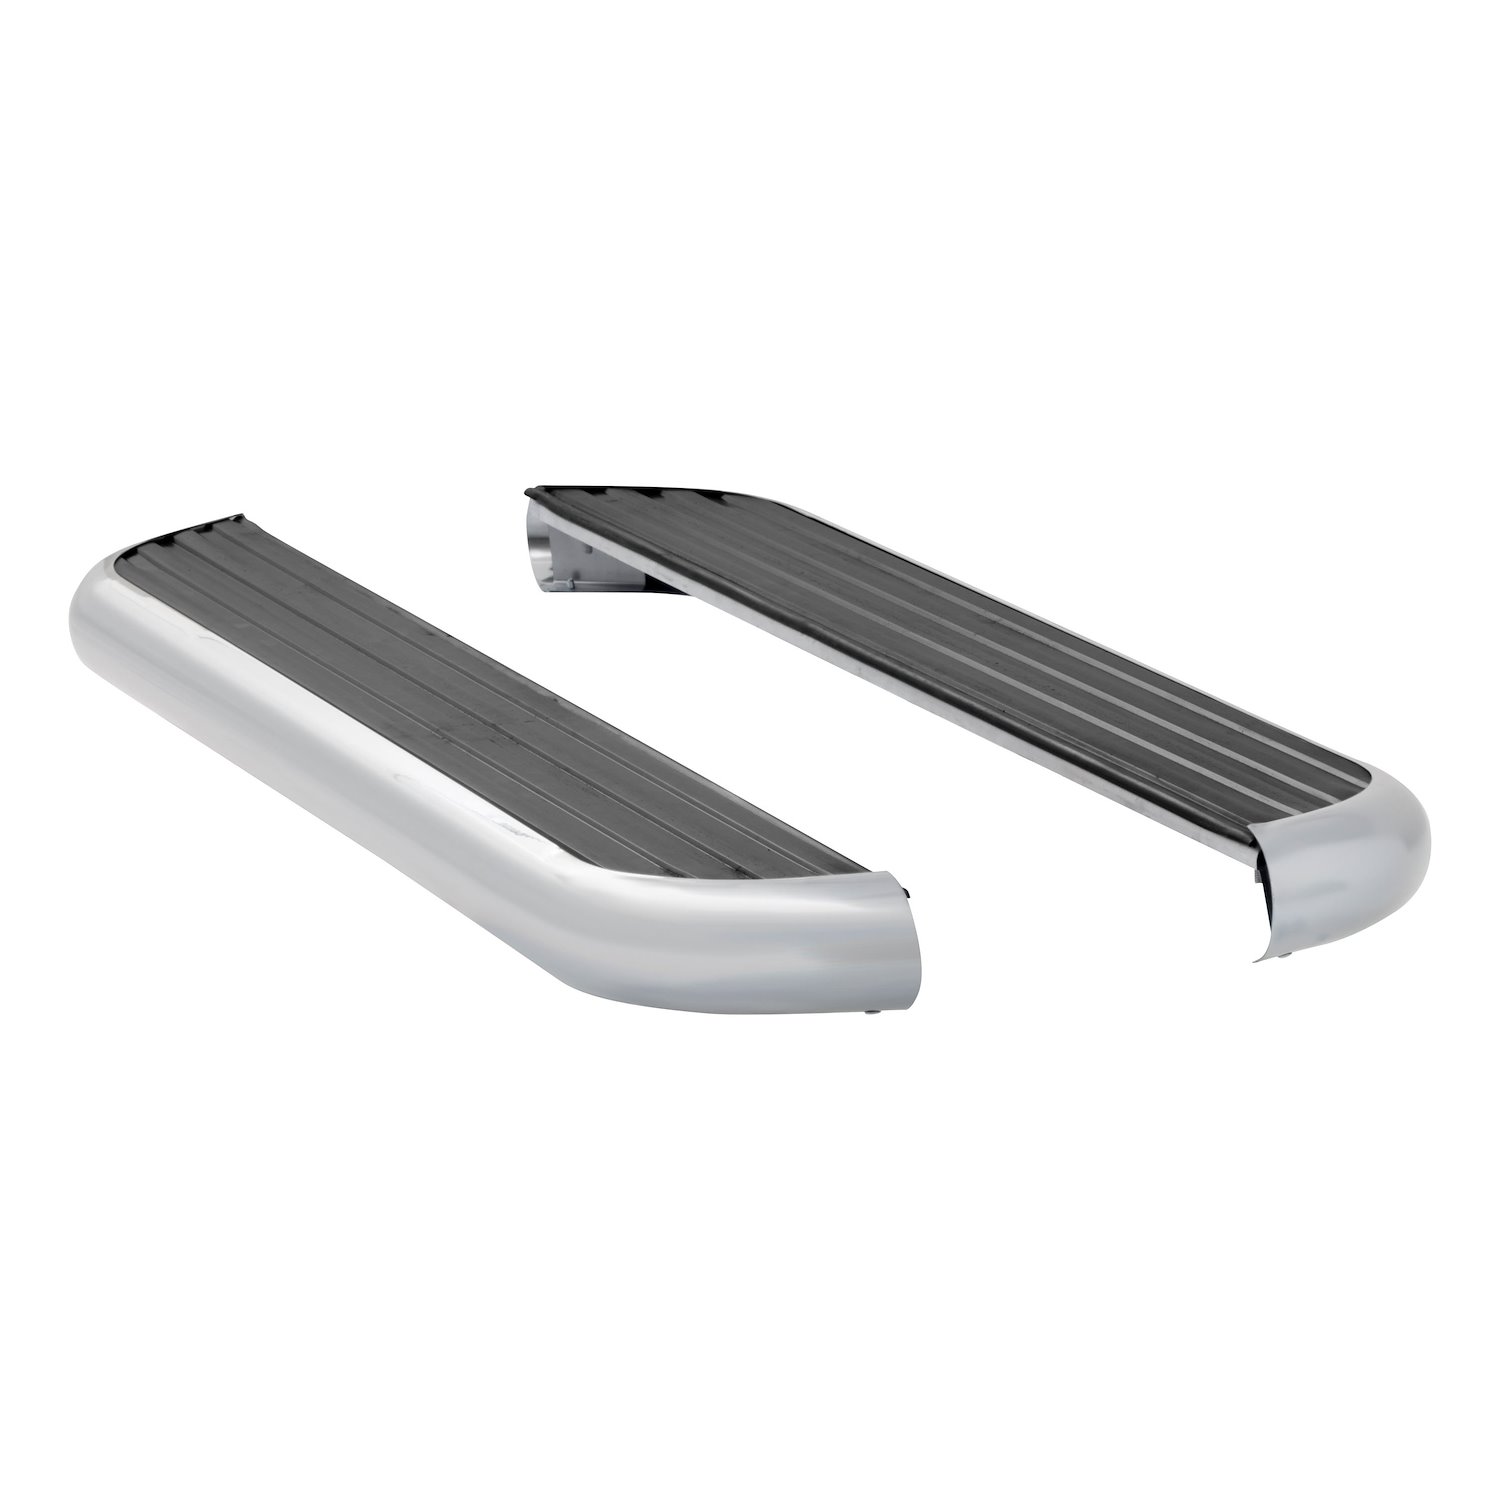 575060-571521 MegaStep 6-1/2 in. x 60 in. Aluminum Running Boards Fits Select Ford F-Series